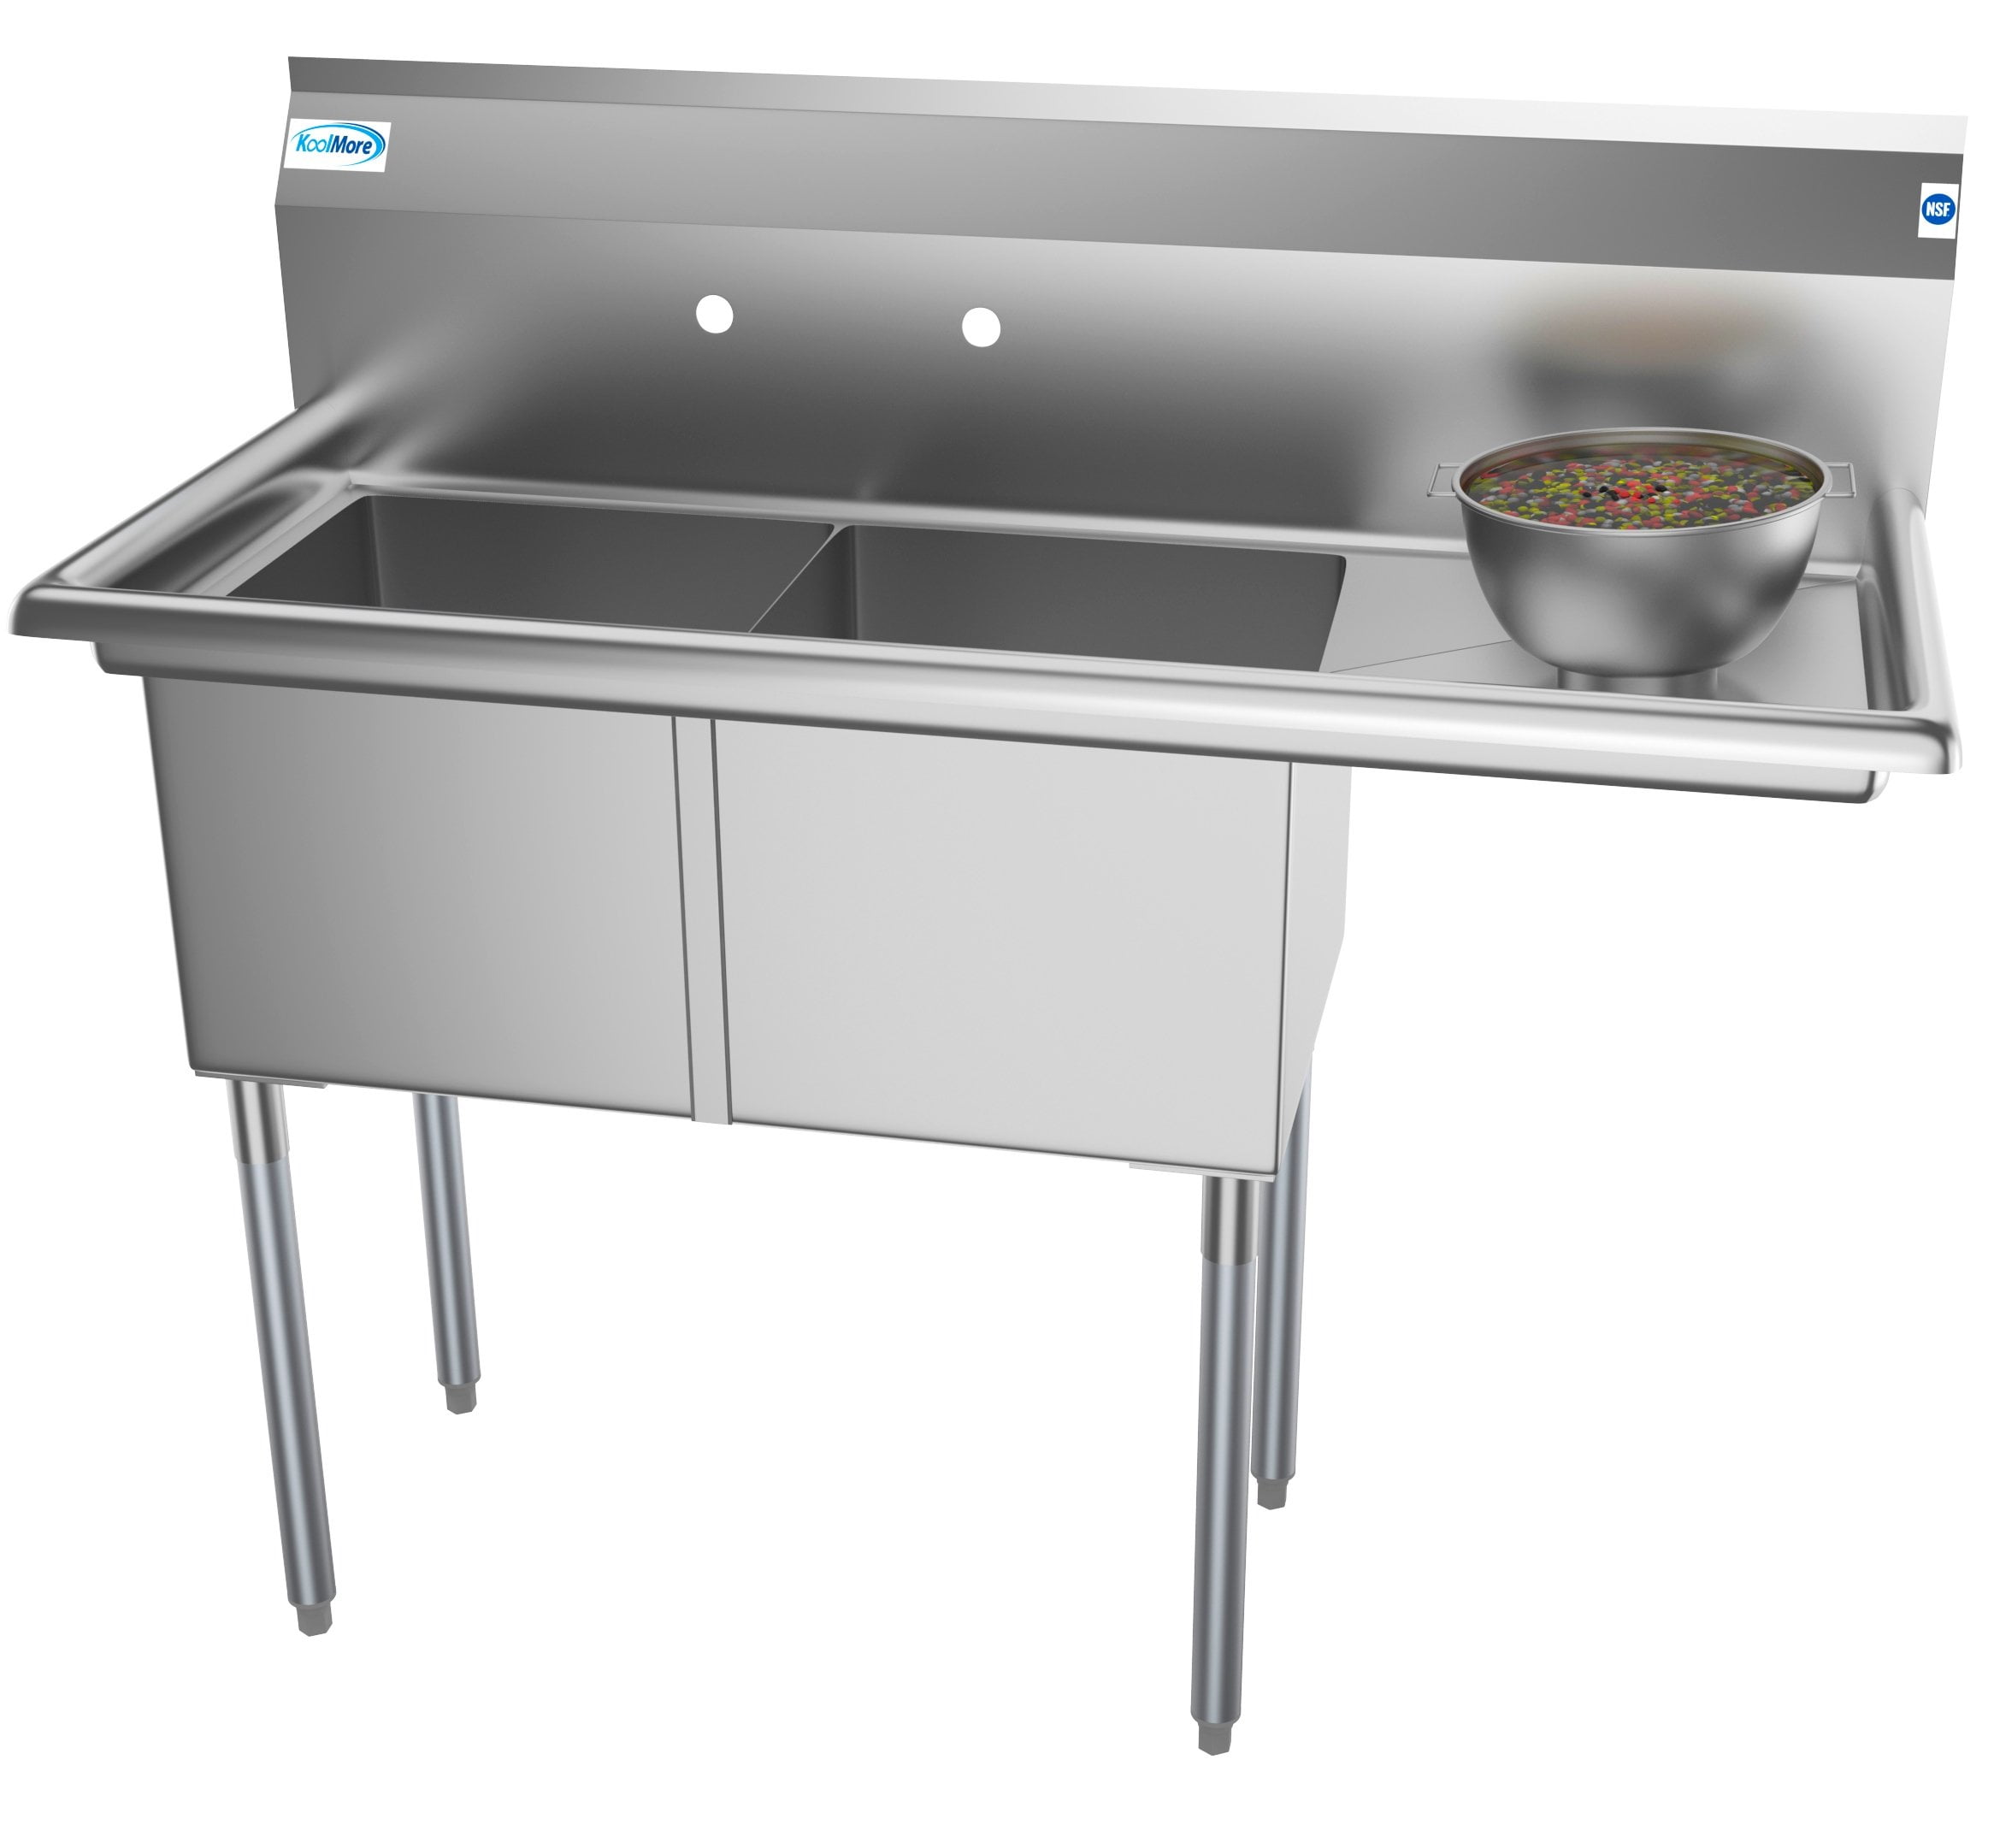 2 Compartment 48" Stainless Steel Commercial Kitchen Prep & Utility Stainless Steel Prep Sink With Drainboard